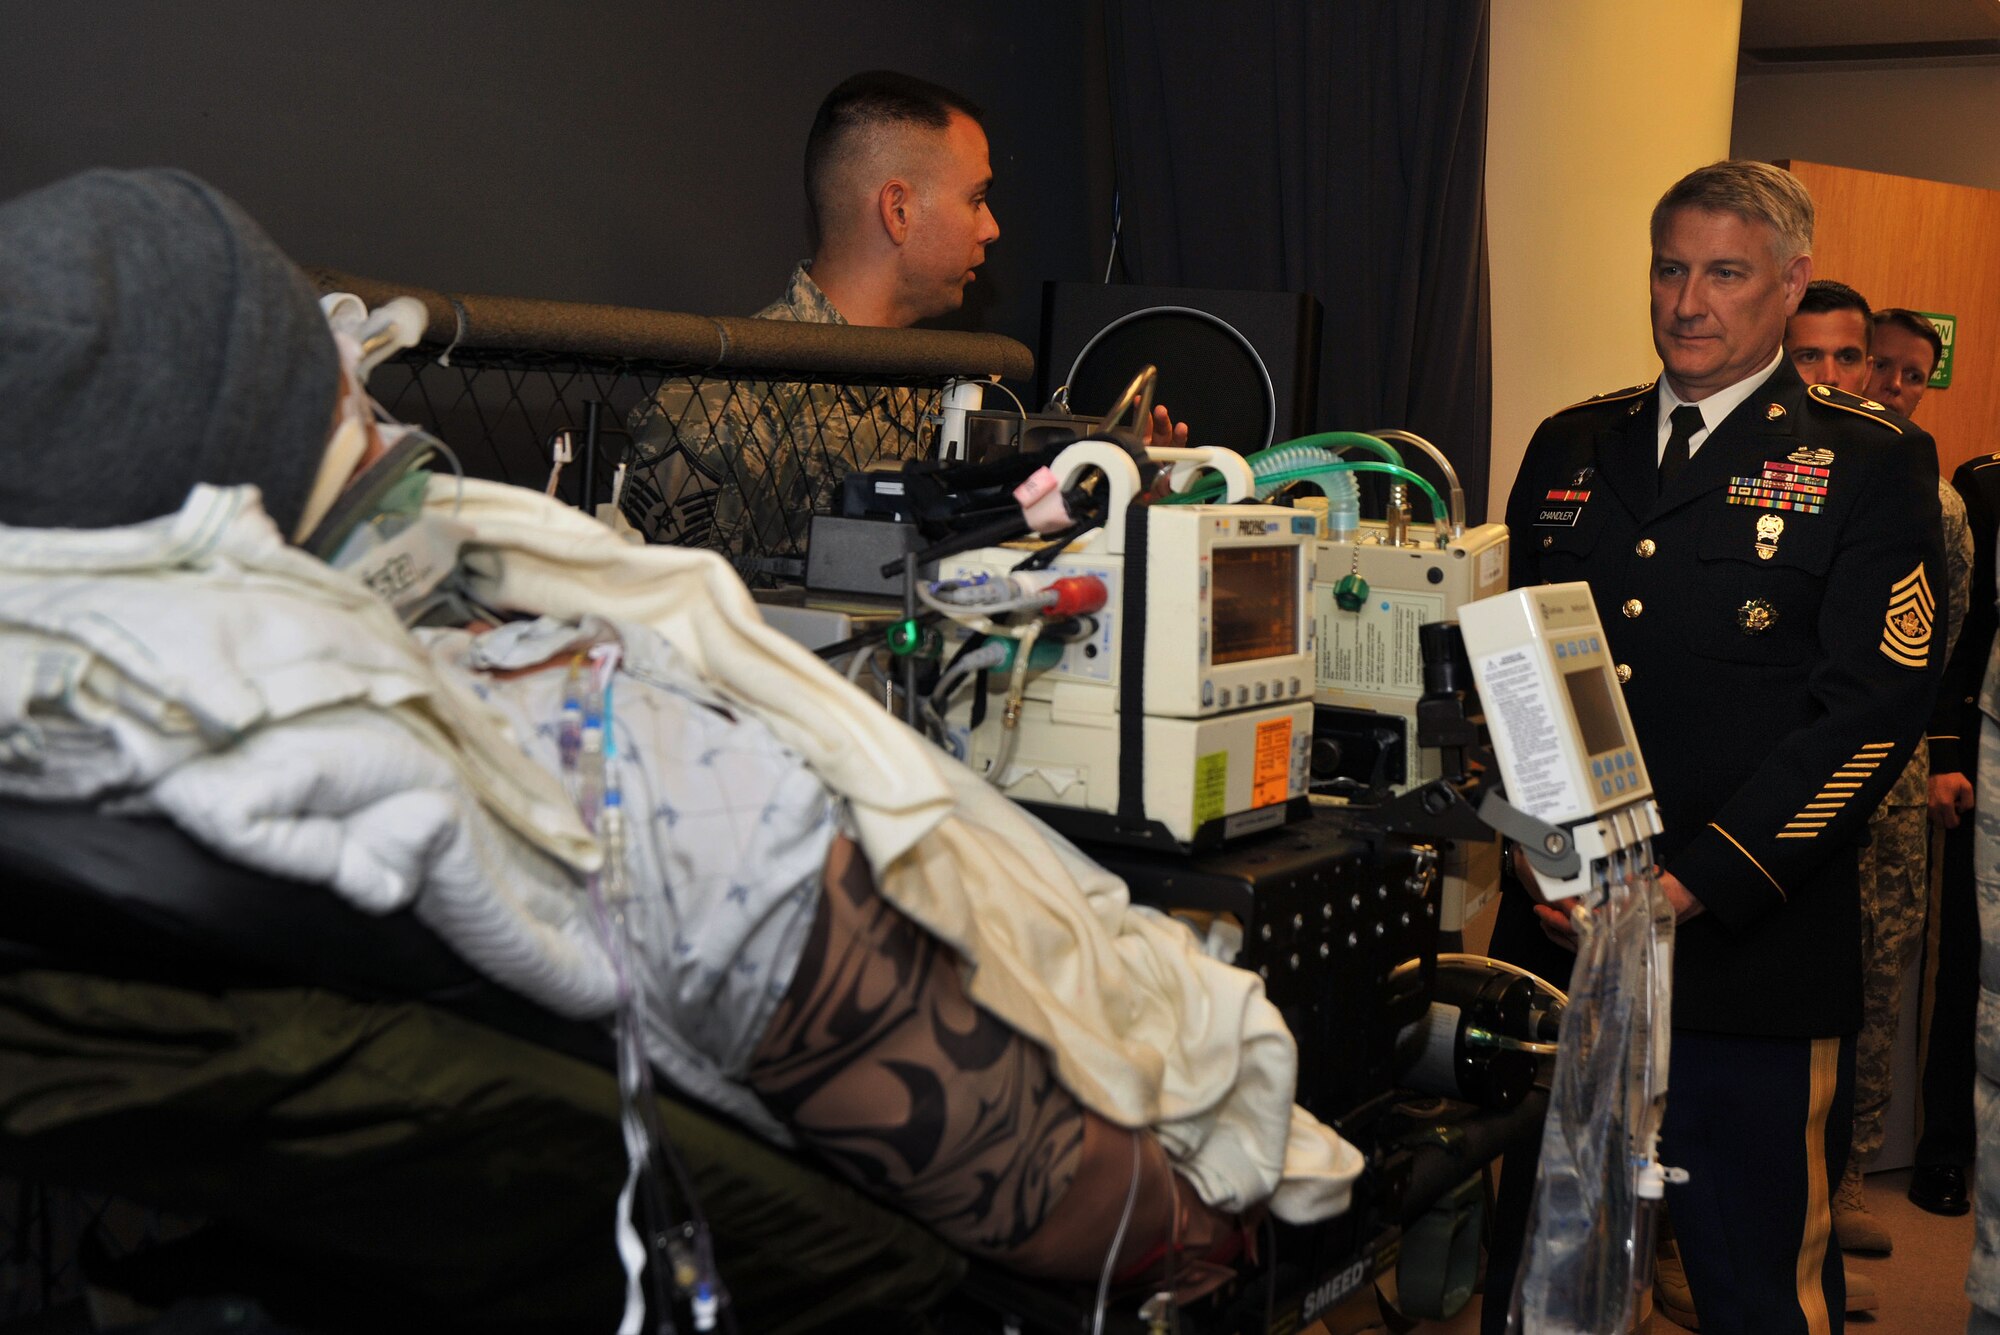 Sgt. James Woods, superintendent of the Center for Sustainment of Trauma and Readiness Skills in Cincinnati, explains to Sgt. Maj. of the Army, Raymond Chandler III the process of how the high-fidelity human patient simulator manikin can replicate any physiology they are going to see in their patients, while inside the Air Force’s CSTARS at the University Hospital, Cincinnati. This critical training allows students to experience the challenges of the austere environment and to improve medical crisis management skills (Air Force photo by Michelle Gigante).